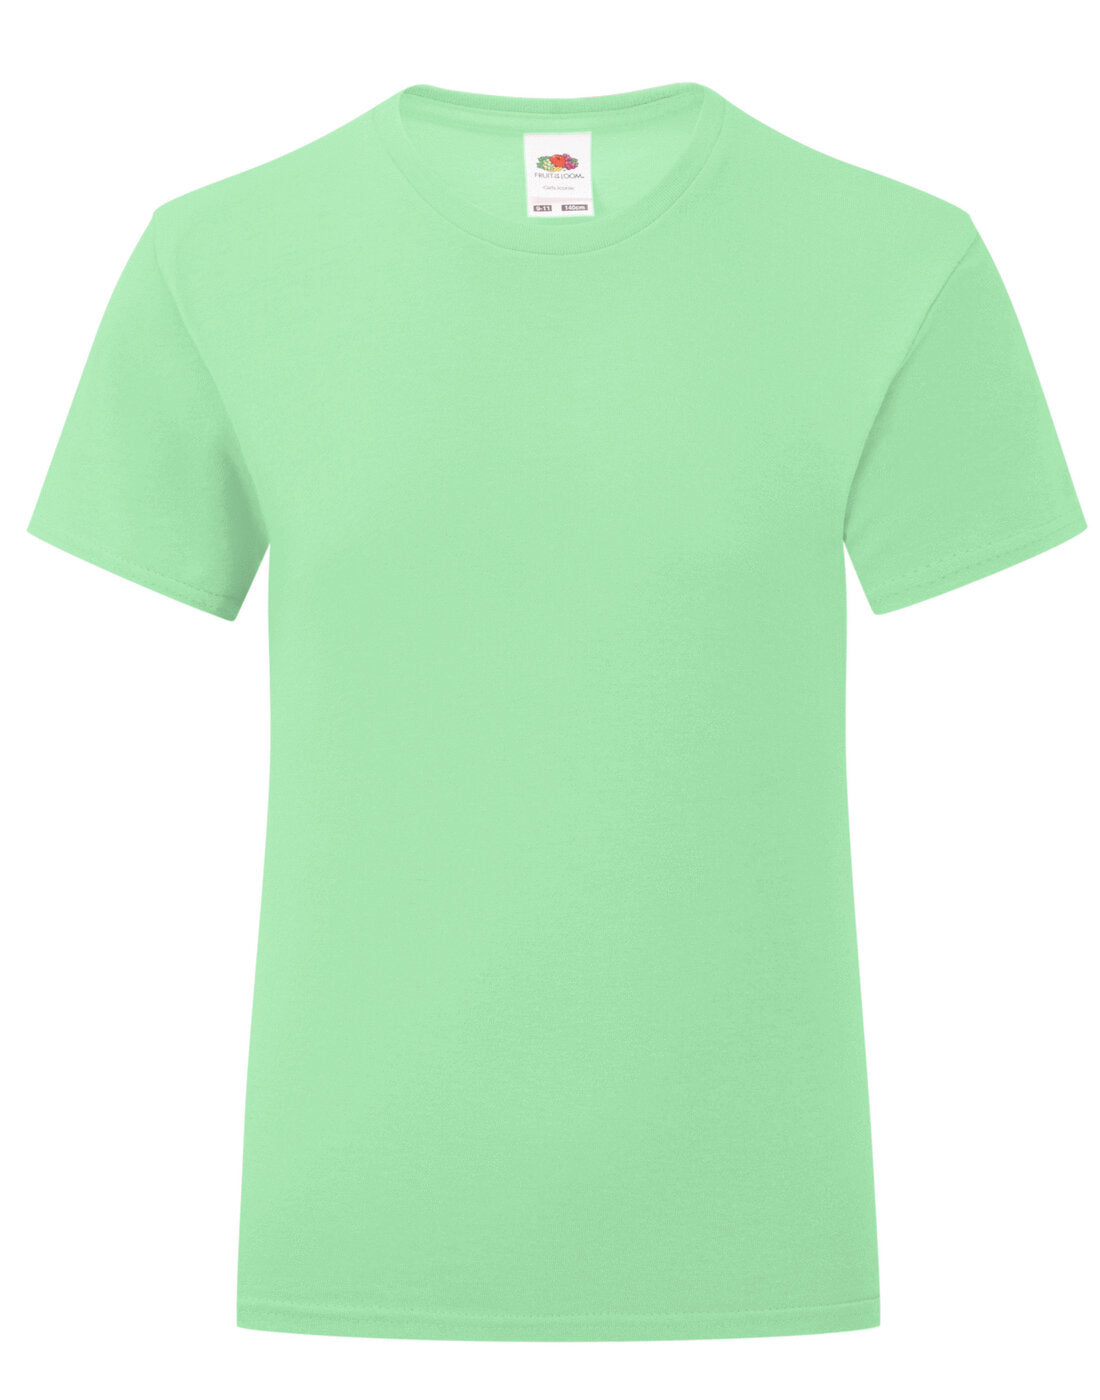 Fruit of the Loom Girls Iconic T - Light Green